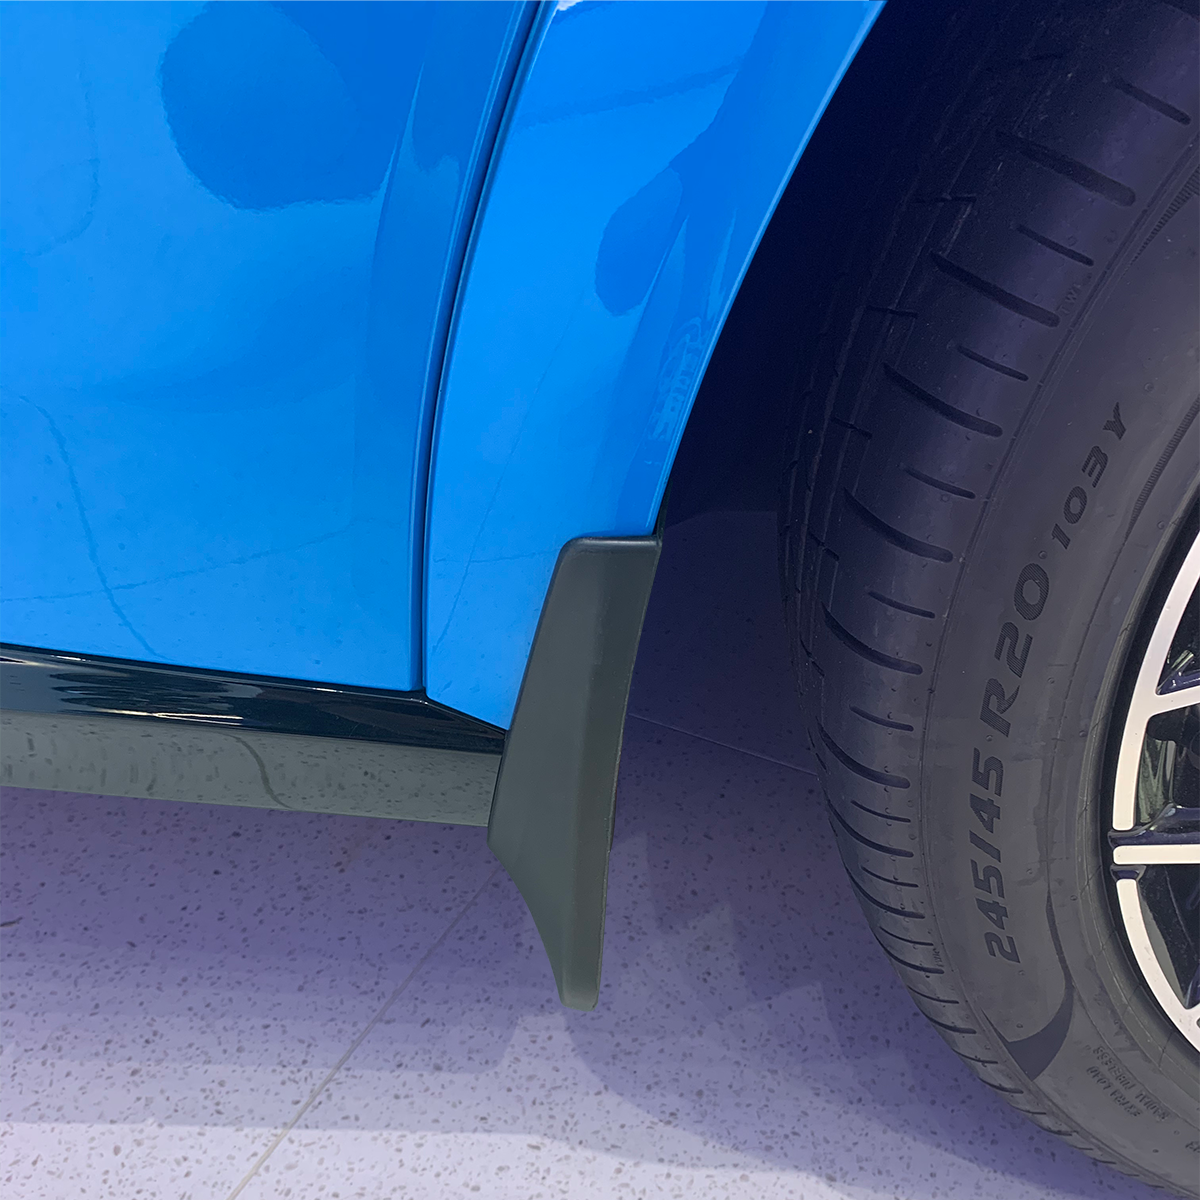 Mach-E Mud Flaps Splash Guards from AOSK